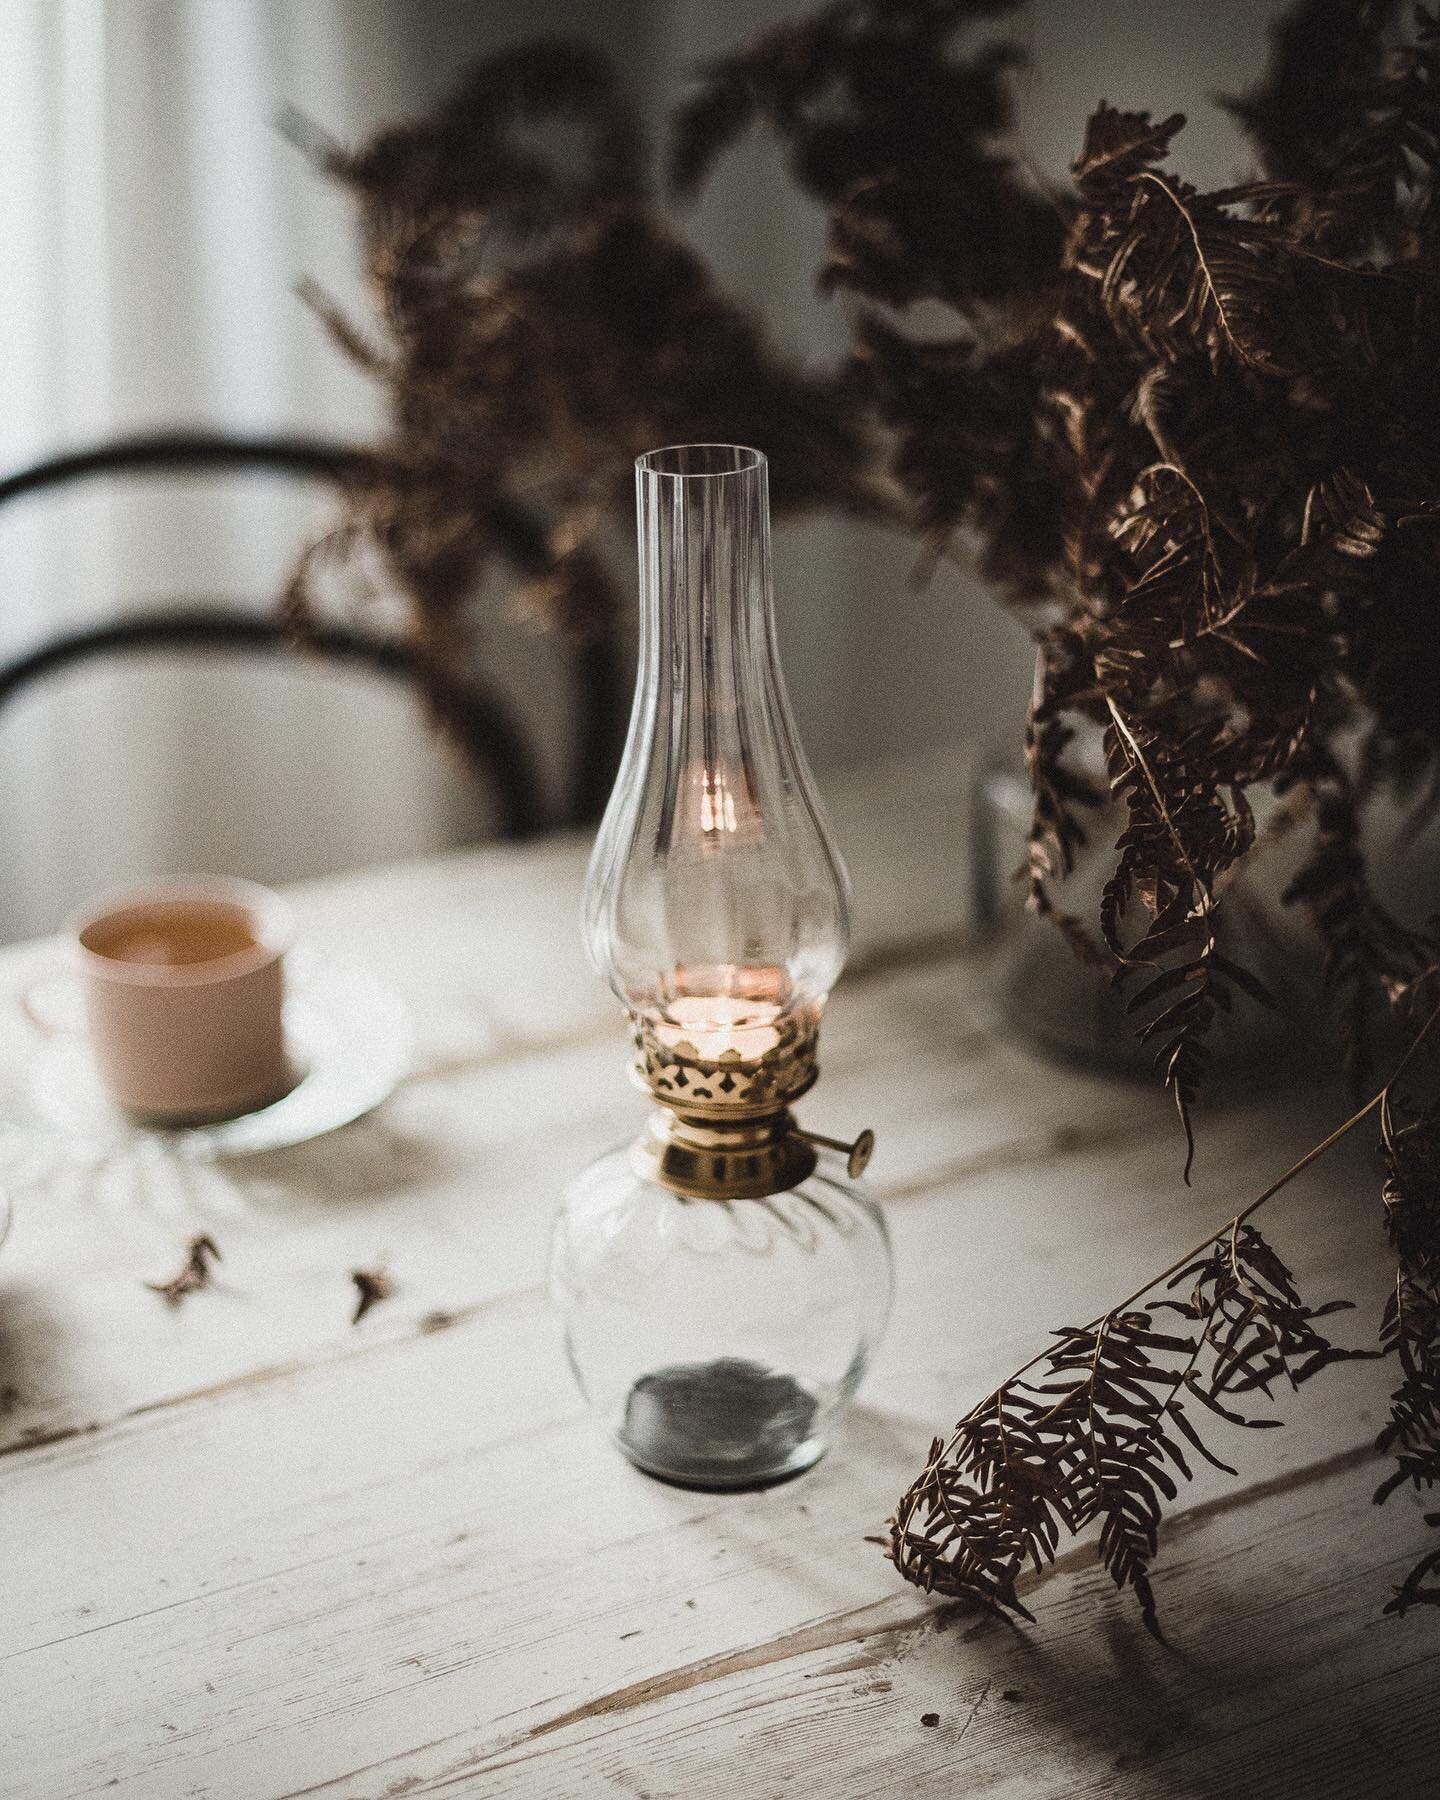 Last day of October 🍂

#pocketsofmyhome #serendipitystyling #embracingbeauty #slowsimpleseasonal #ofwhimsicalmoments #nordiclife #nordicinspiration #scandinavianlifestyle #hygge